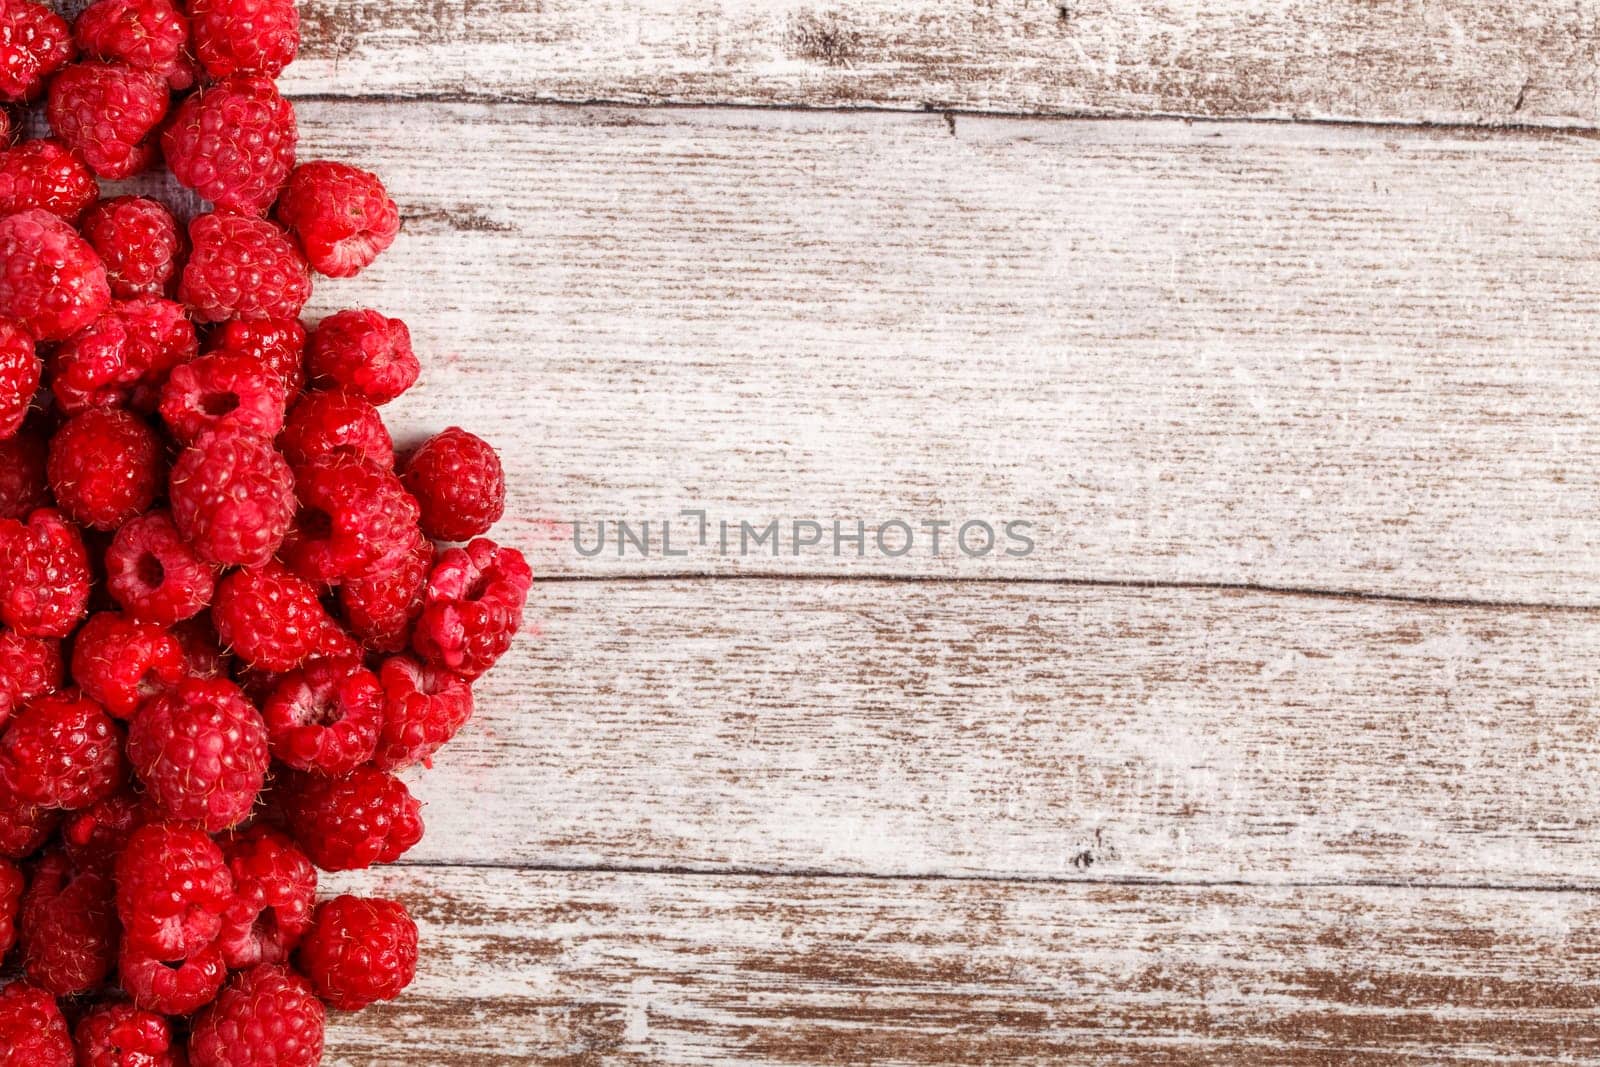 Summer fresh fruits. Raspberry on wooden table by DCStudio